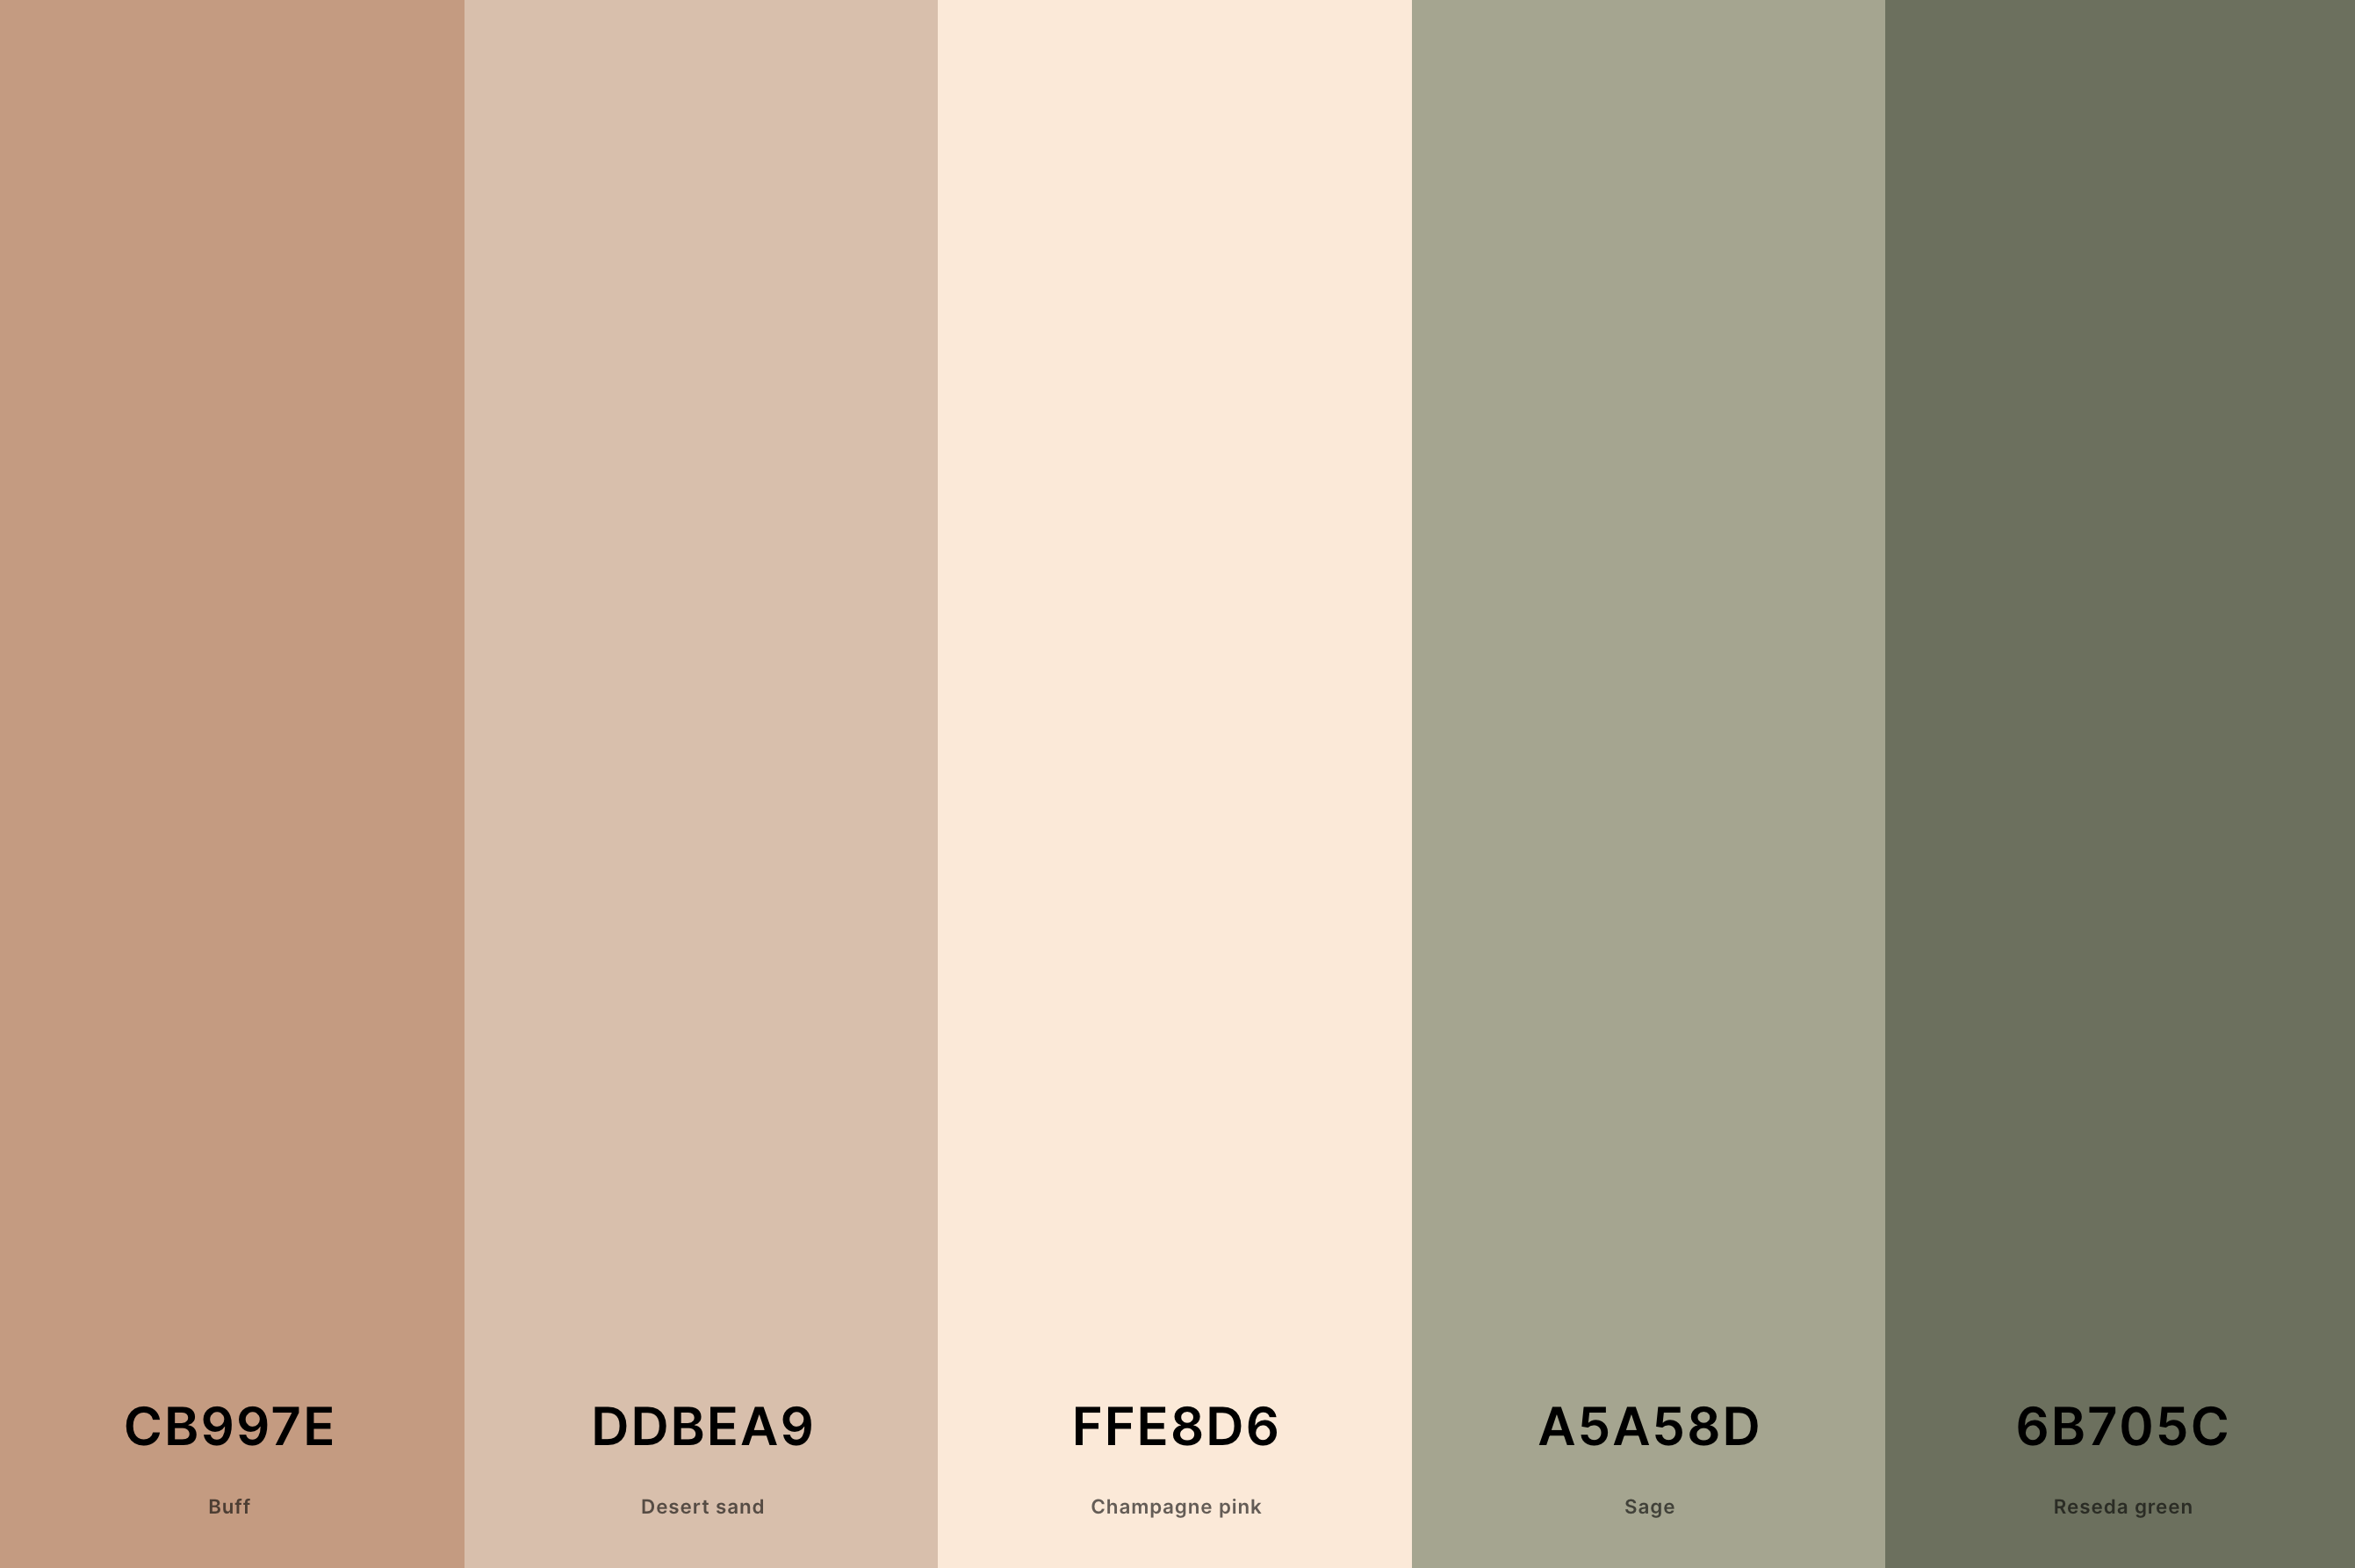 14. Sage Green Aesthetic Color Palette Color Palette with Buff (Hex #CB997E) + Desert Sand (Hex #DDBEA9) + Champagne Pink (Hex #FFE8D6) + Sage (Hex #A5A58D) + Reseda Green (Hex #6B705C) Color Palette with Hex Codes